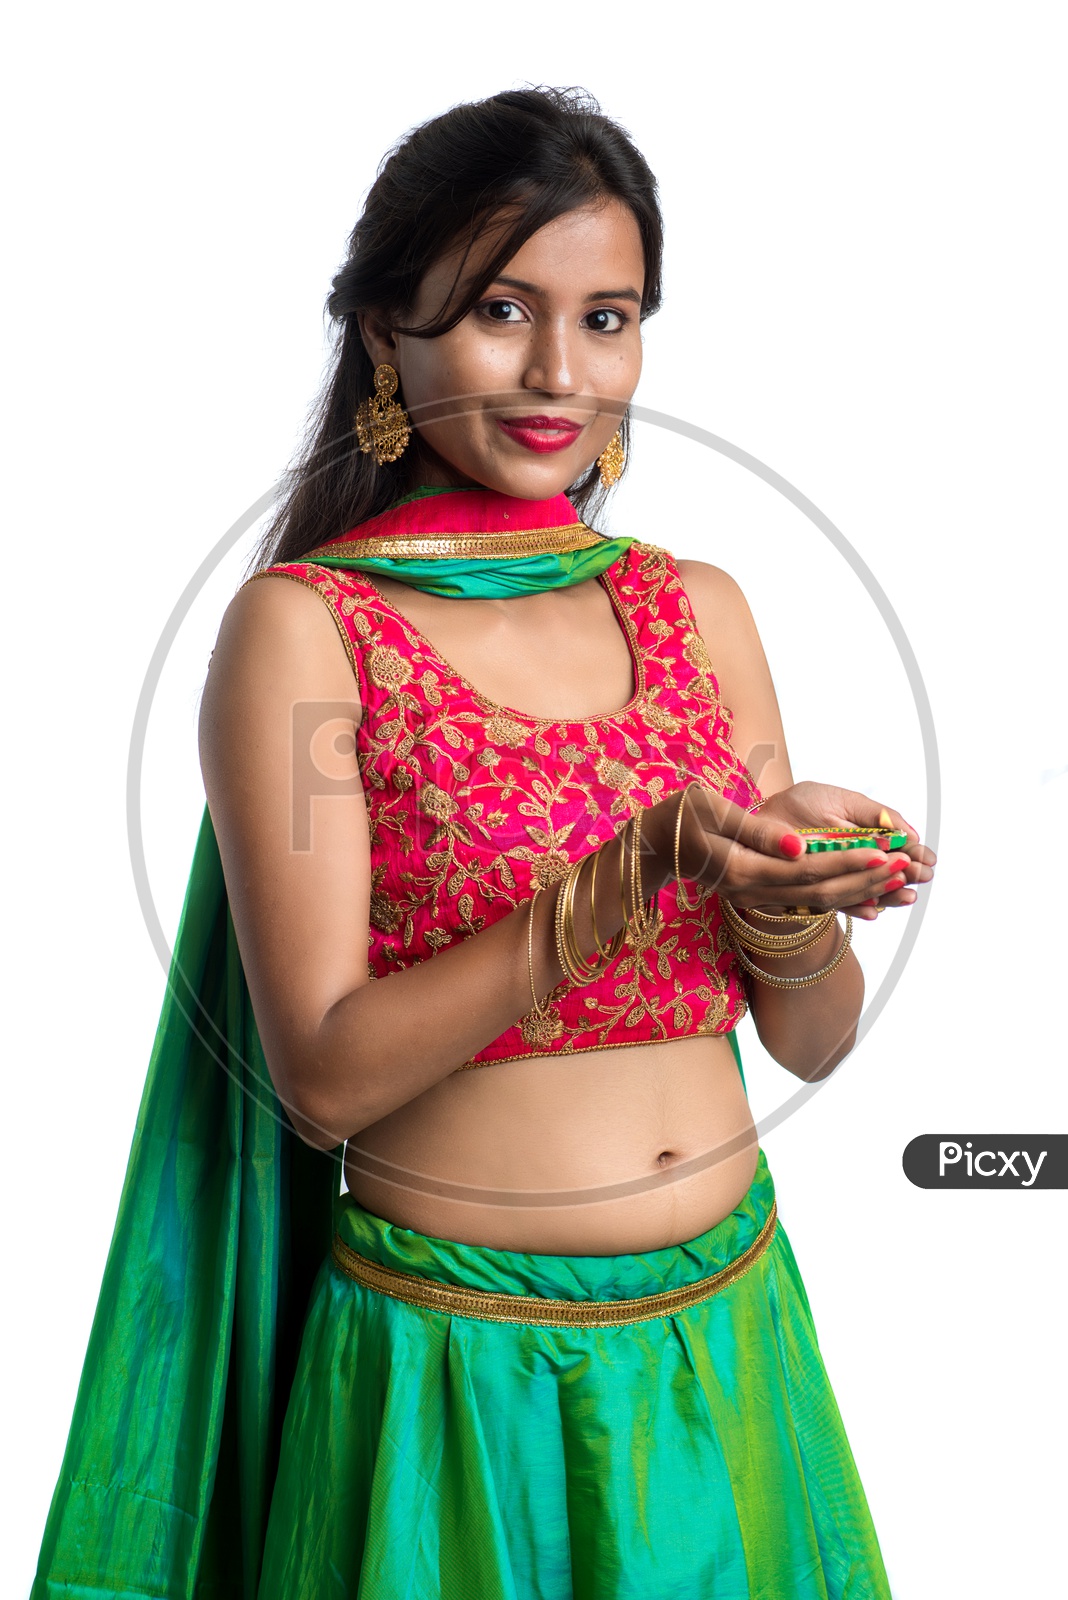 Portrait Of a Young Indian Traditional Woman Holding Dia  In Hand  Over a White Background